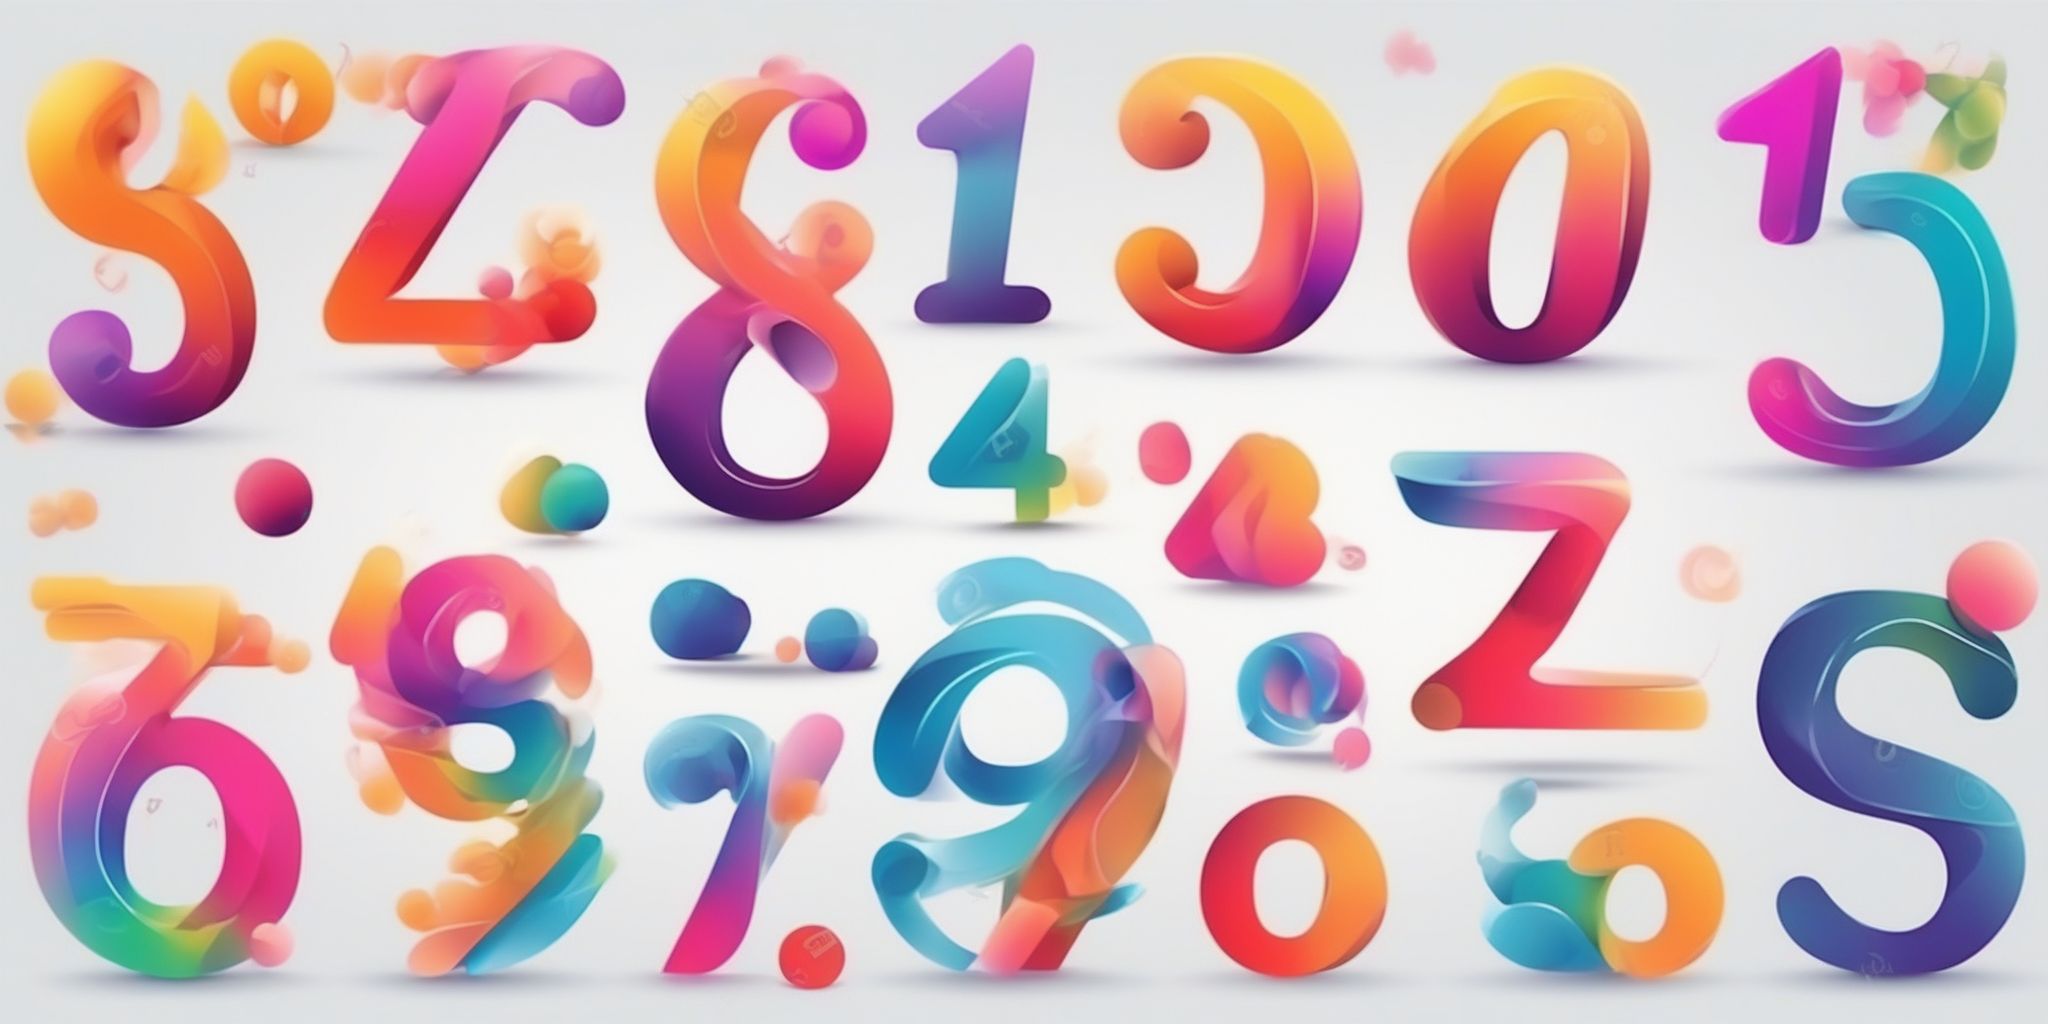 numbers in illustration style with gradients and white background